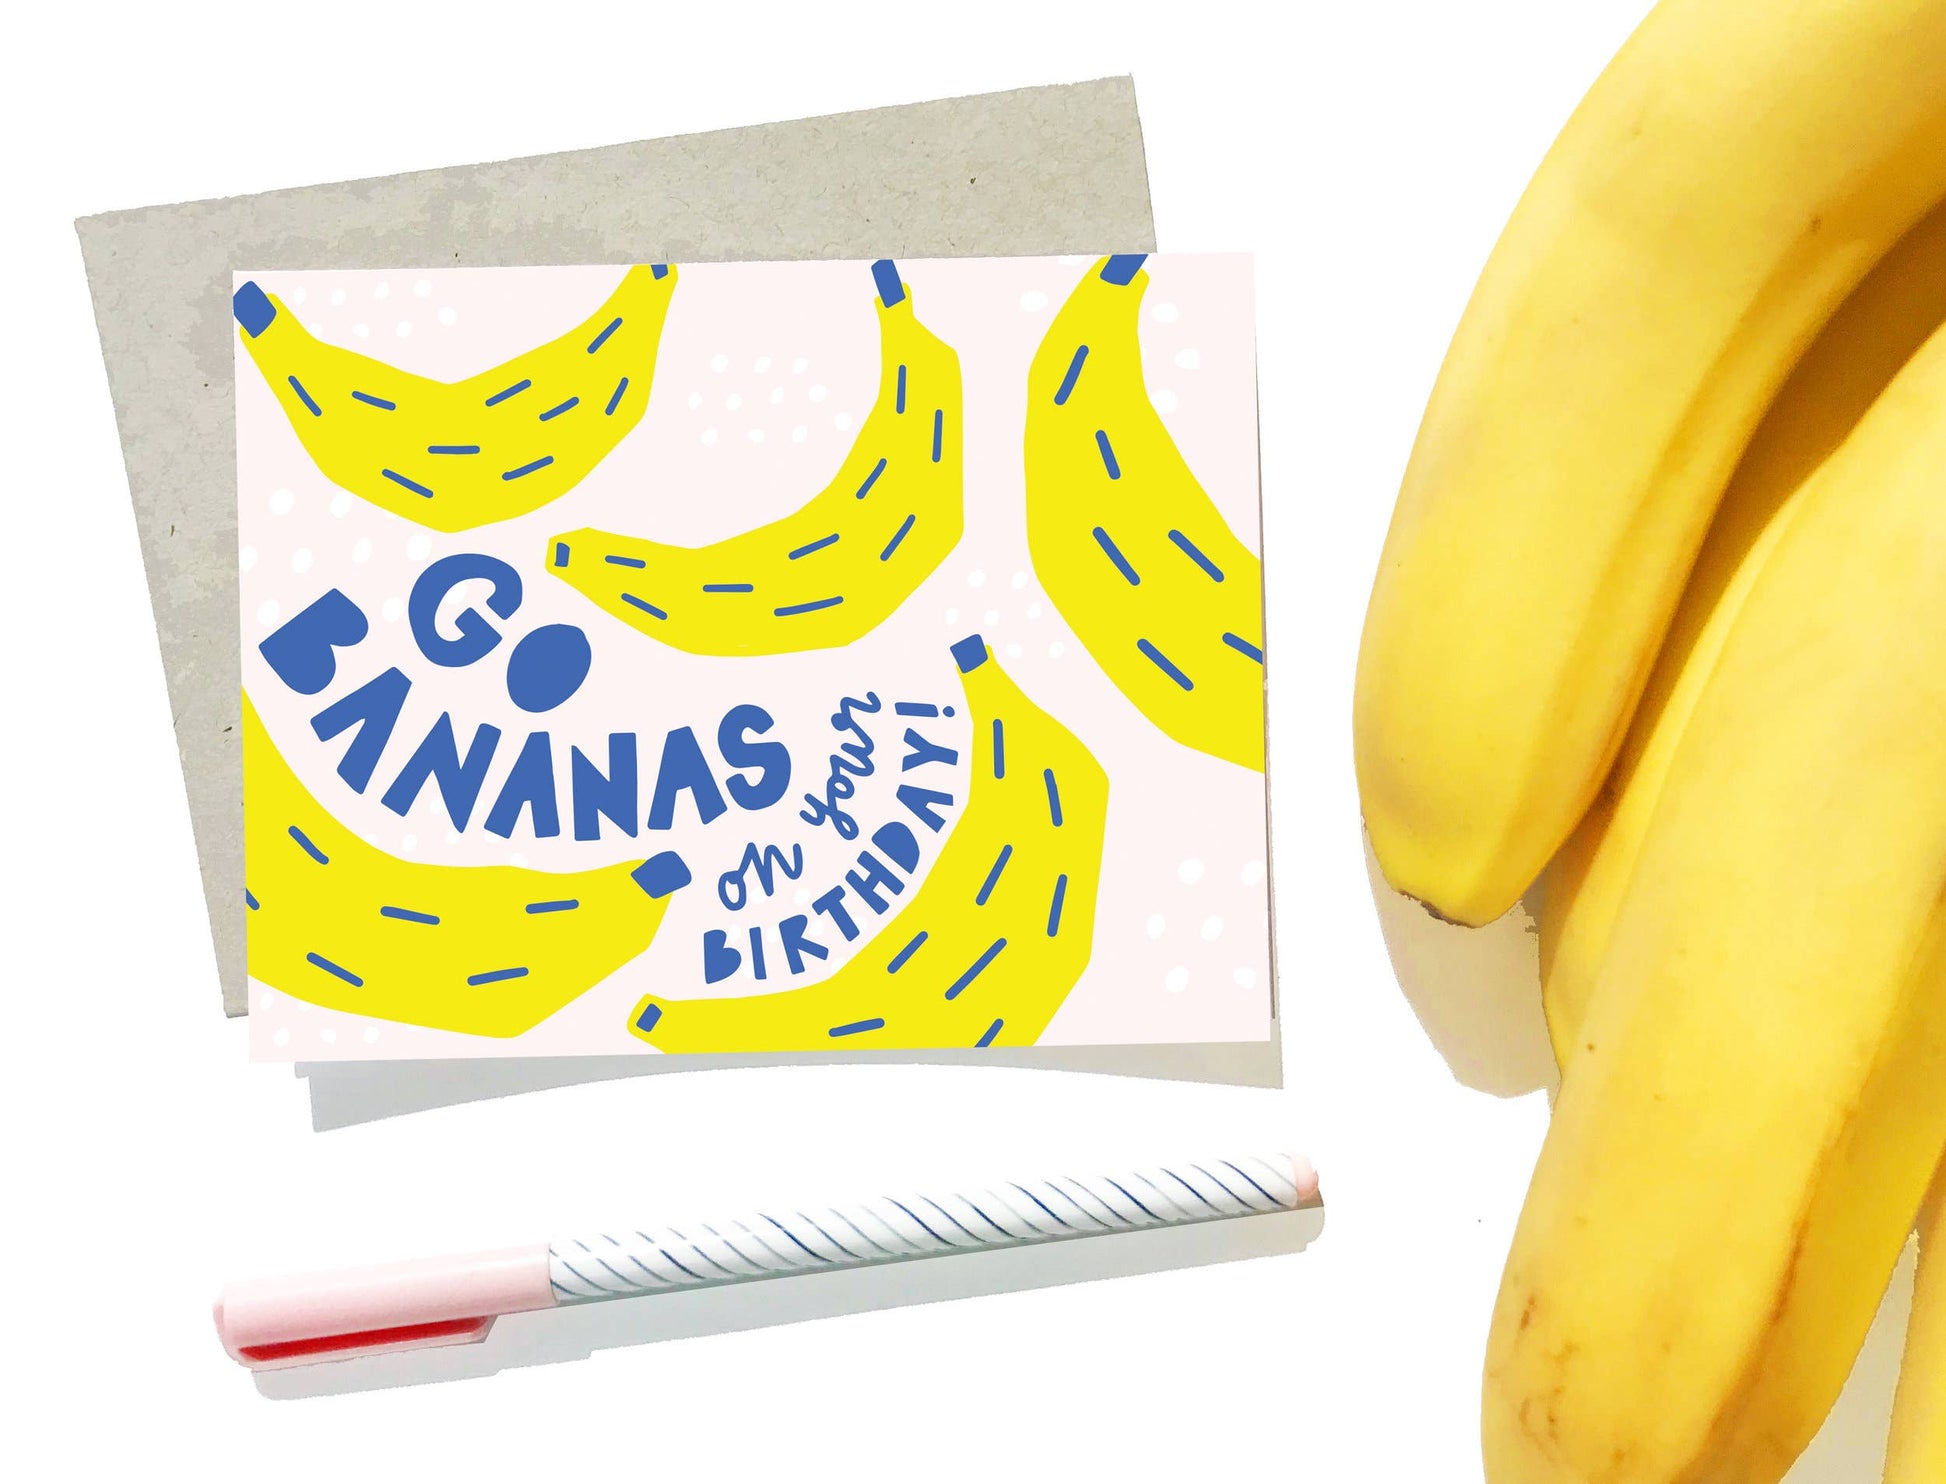 Greeting card that reads "Go Bananas on your birthday!" and has bananas all over 